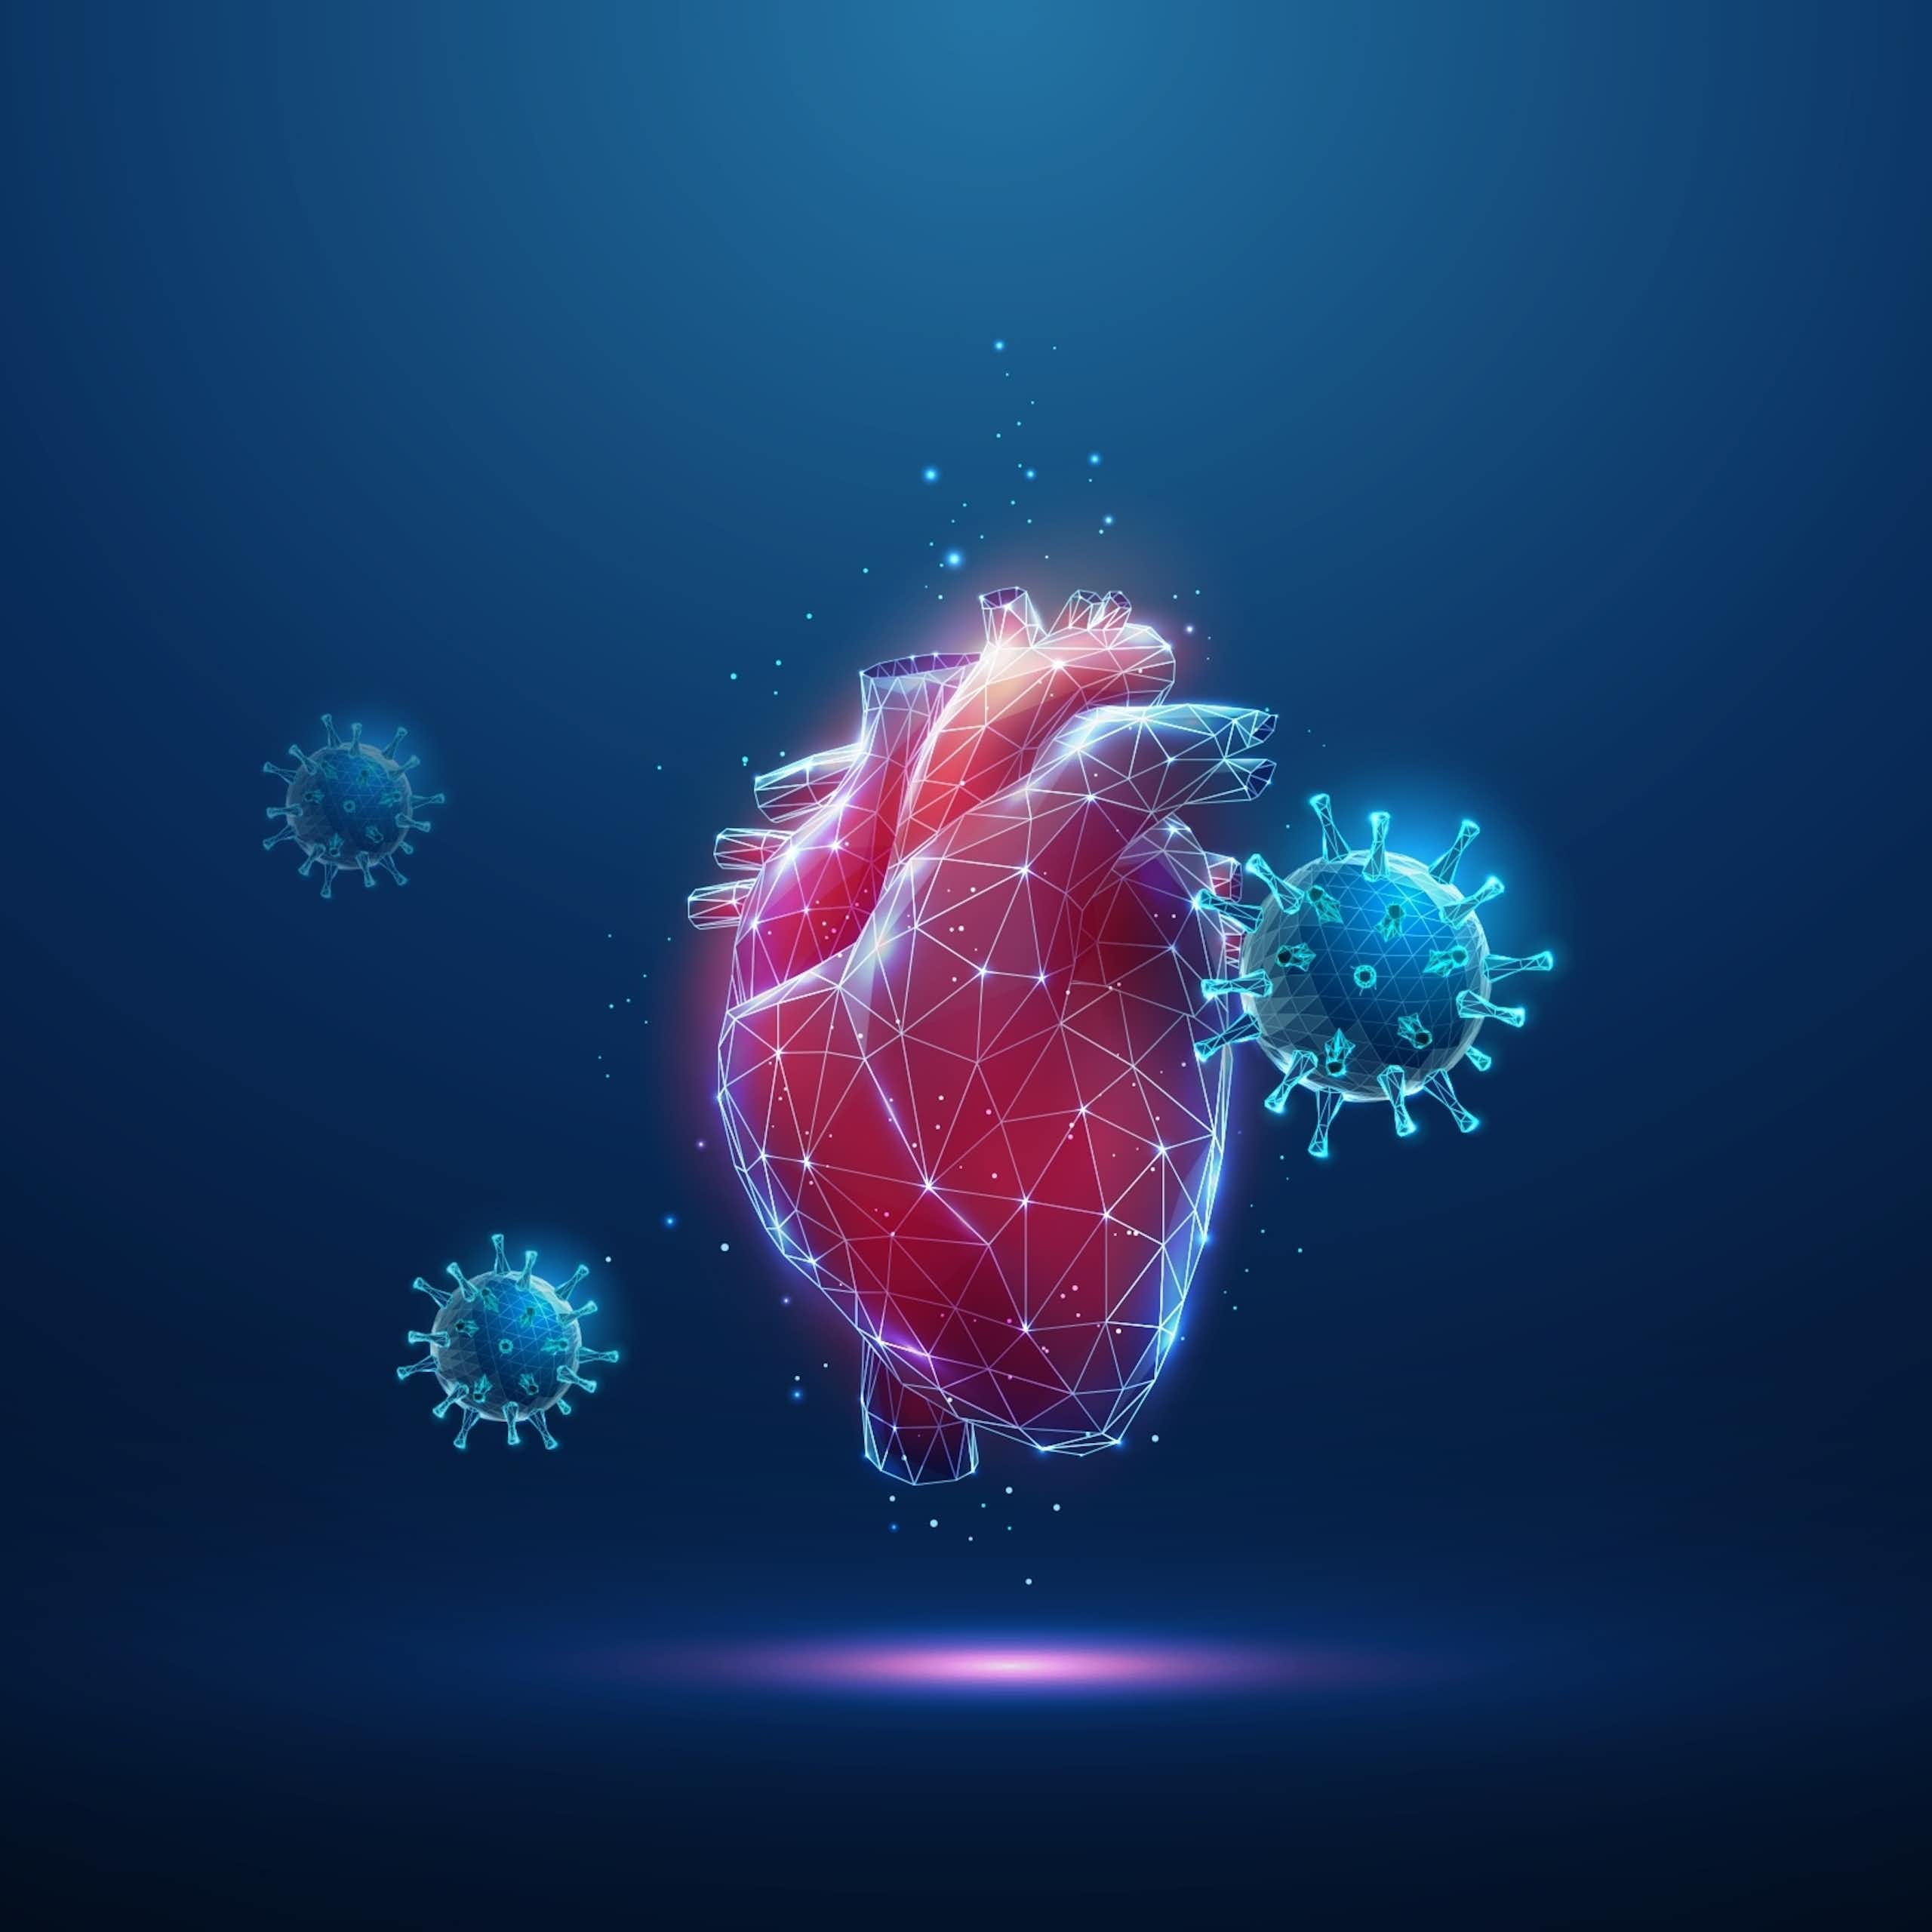 Illustration of a human heart and SARS-CoV-2 virus particles on a blue backround